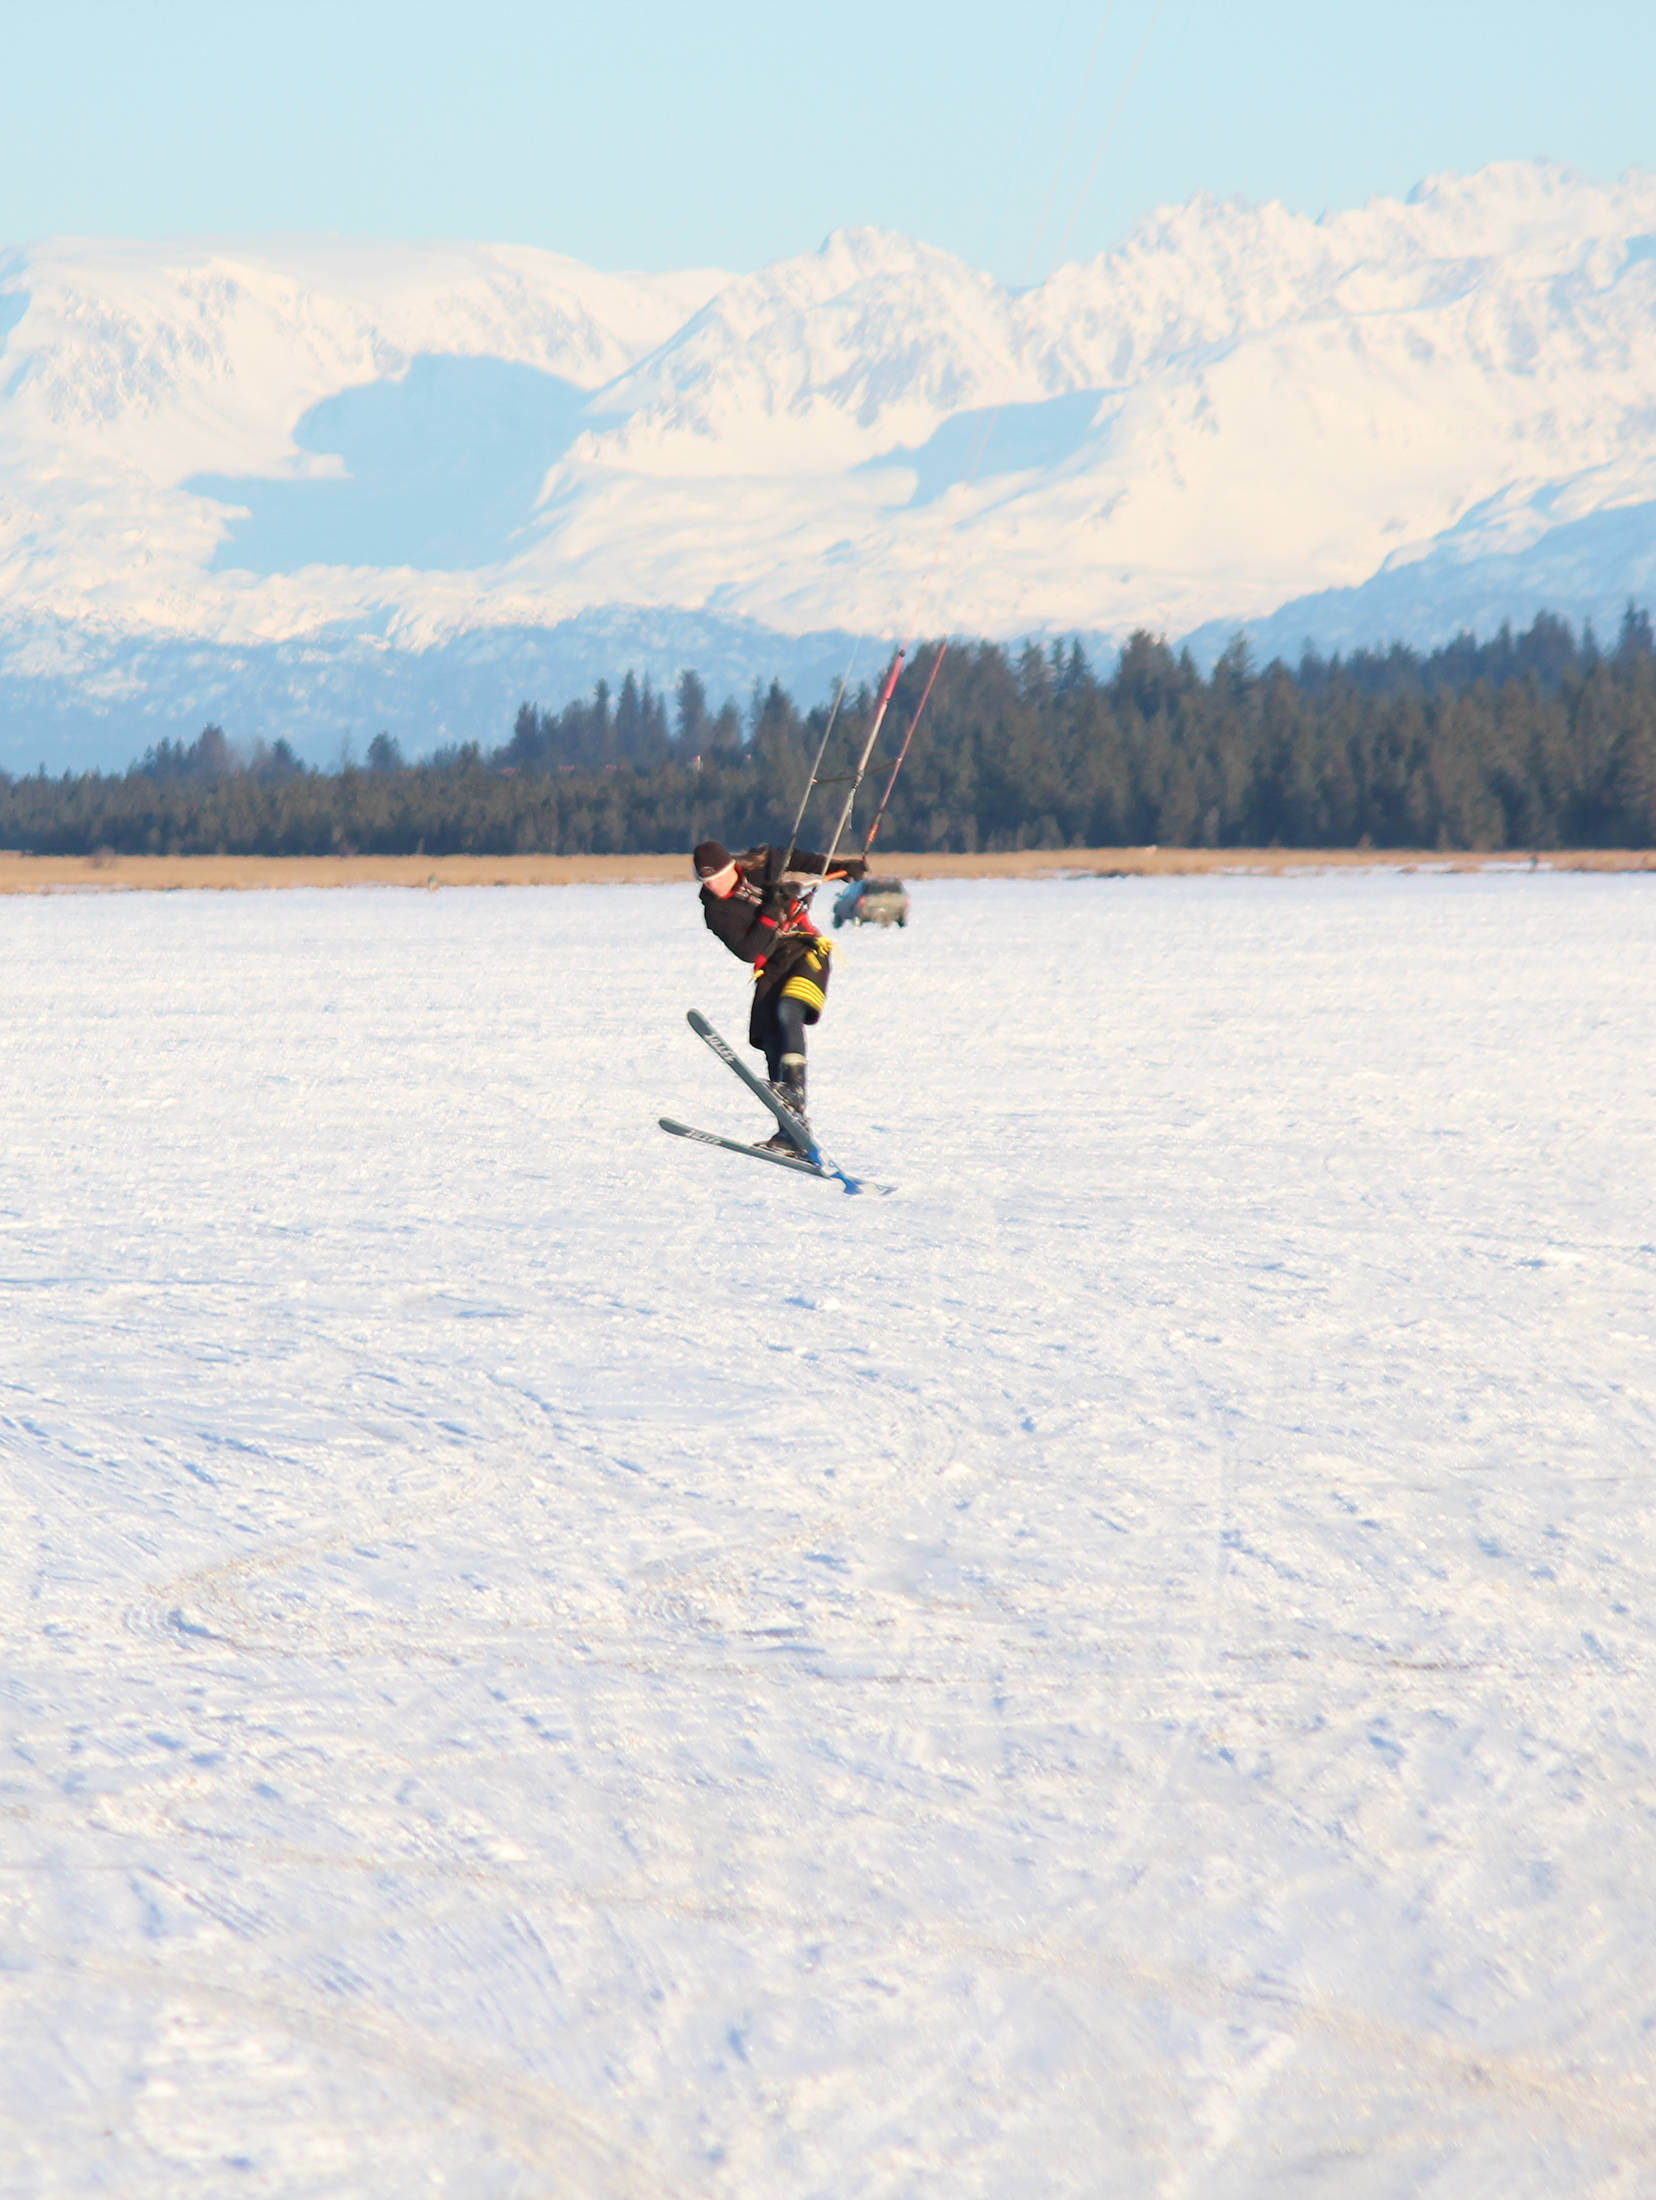 A man catches some air while snowkiting, or kite skiing, on Beluga Lake on Saturday, Feb. 3, 2018 in Homer, Alaska. Outdoor enthusiasts use the power provided by a large kite on a windy day to glide across snow or ice. (Photo by Megan Pacer/Homer News)